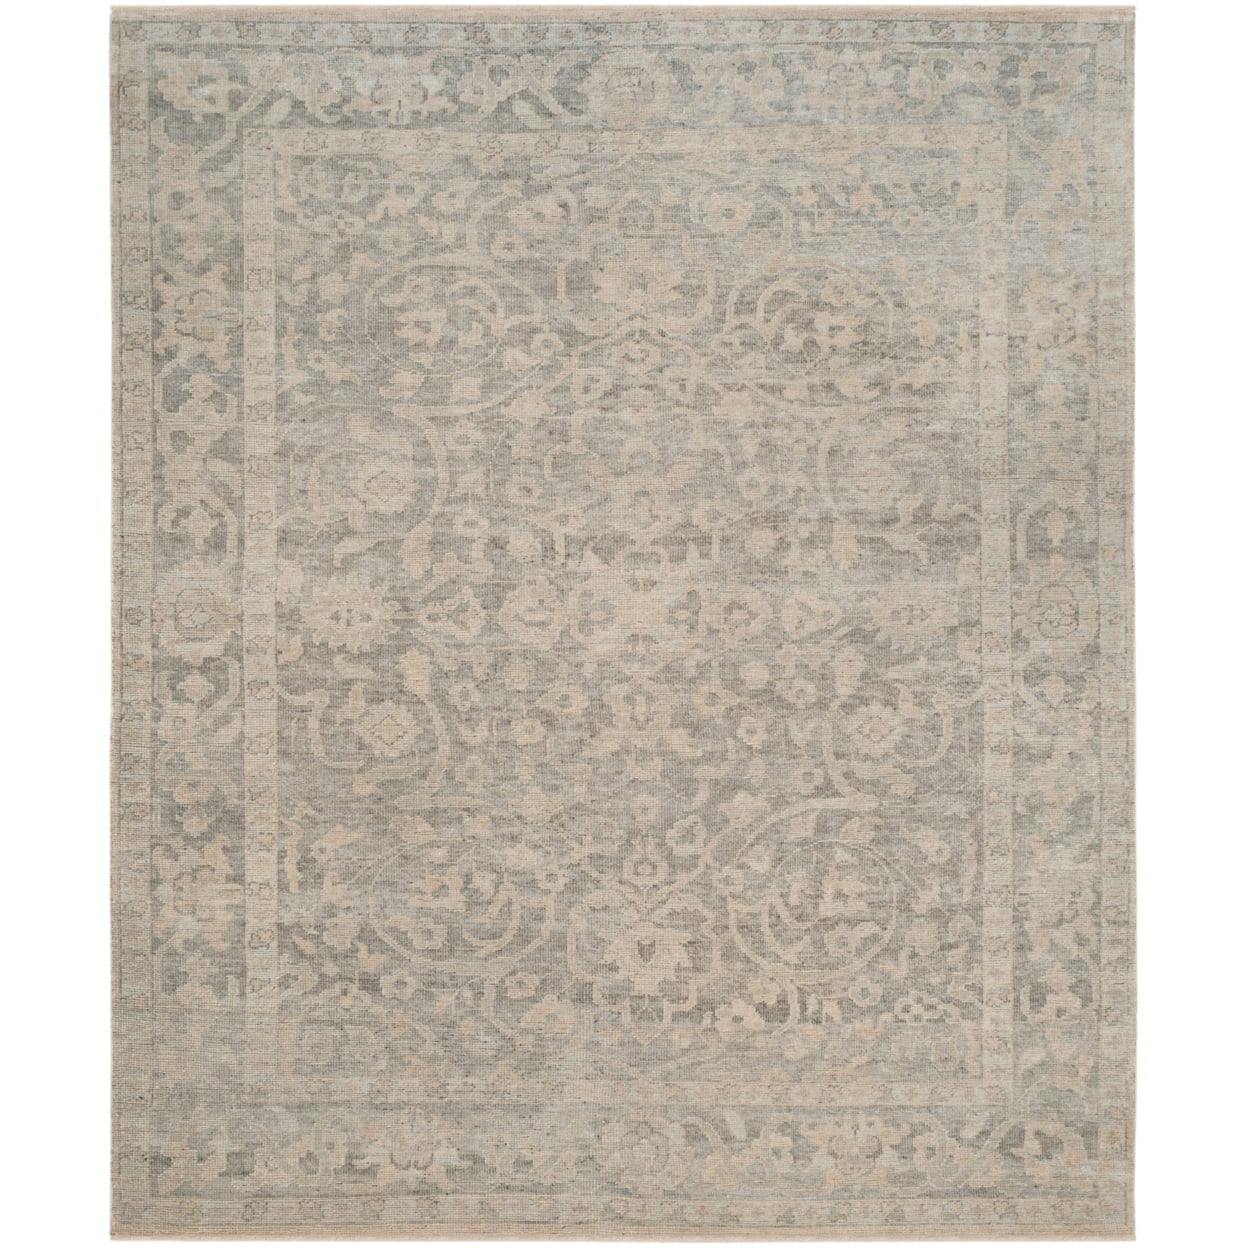 Hand-Knotted Gray Wool Rectangular Area Rug 8' x 10'